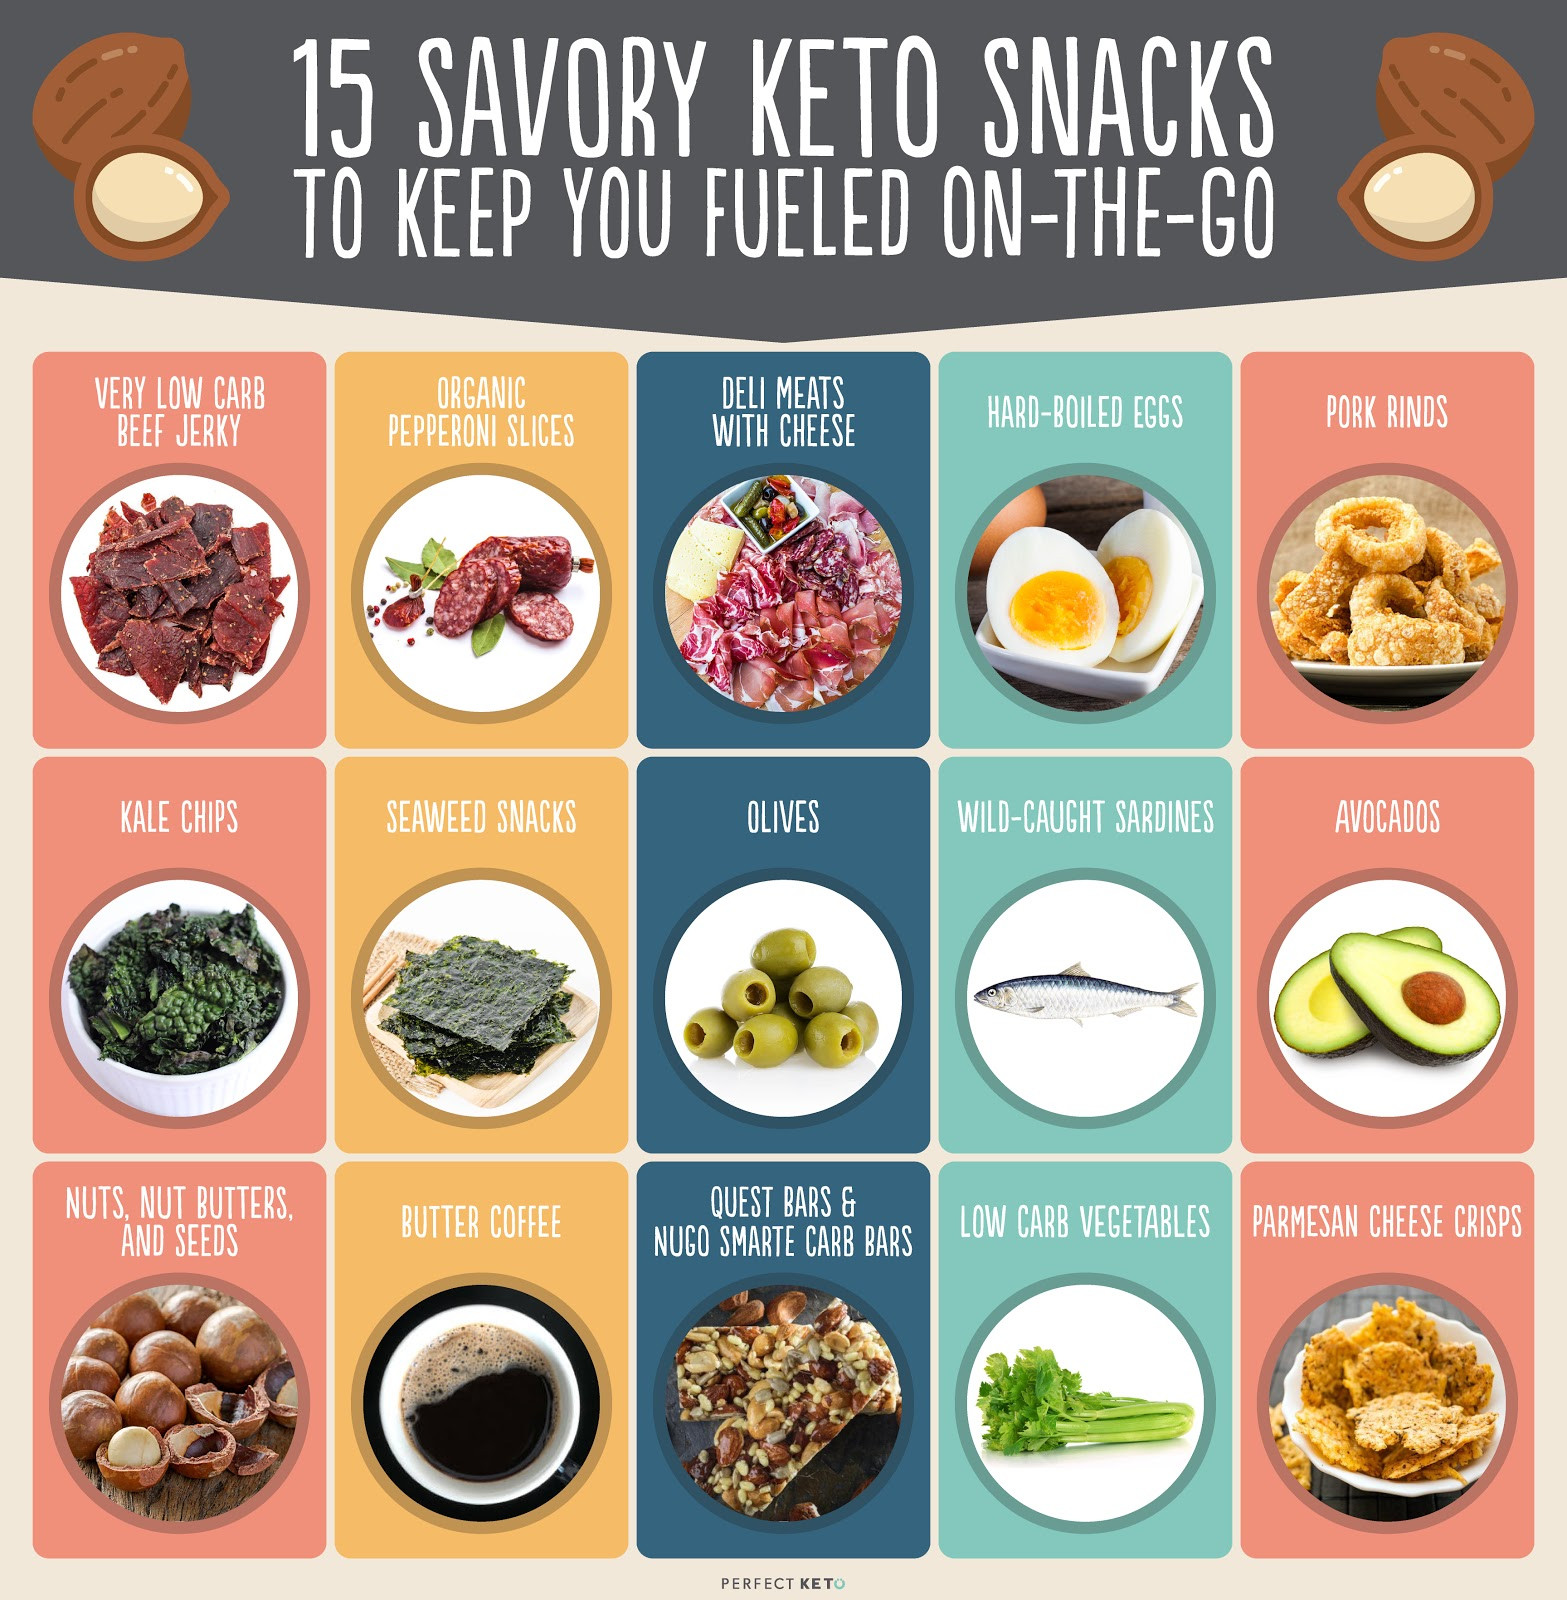 Keto Diet Snacks Store Bought
 20 Best Store Bought Keto Snacks Reviews and Guide